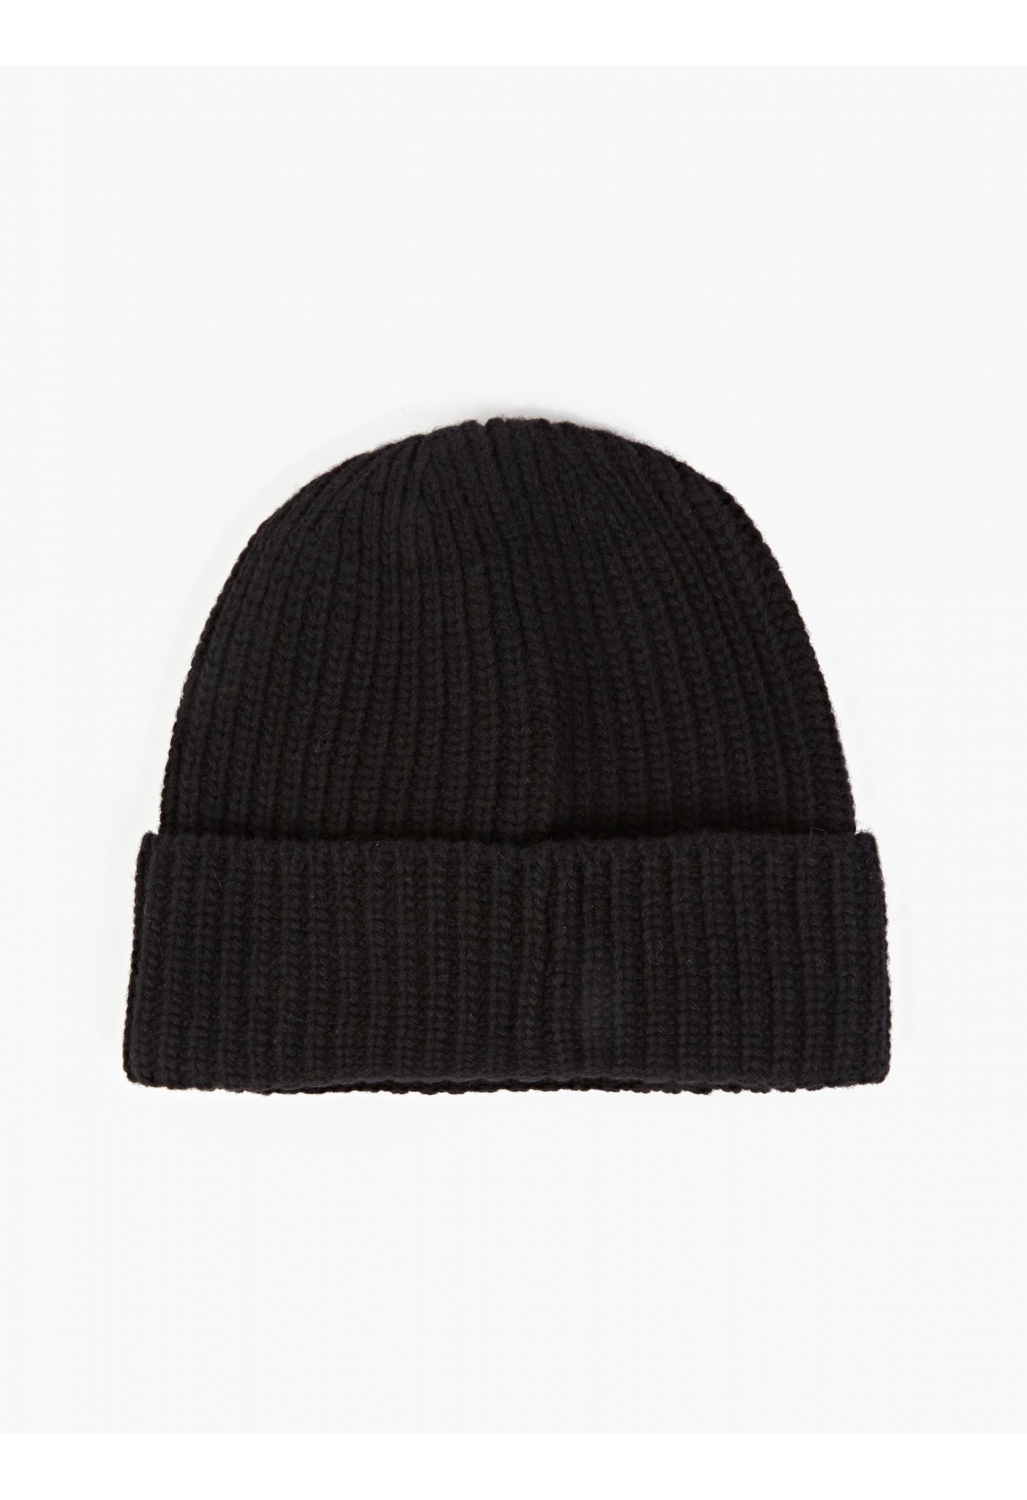 Stone island Black Ribbed Beanie Hat in Black for Men | Lyst